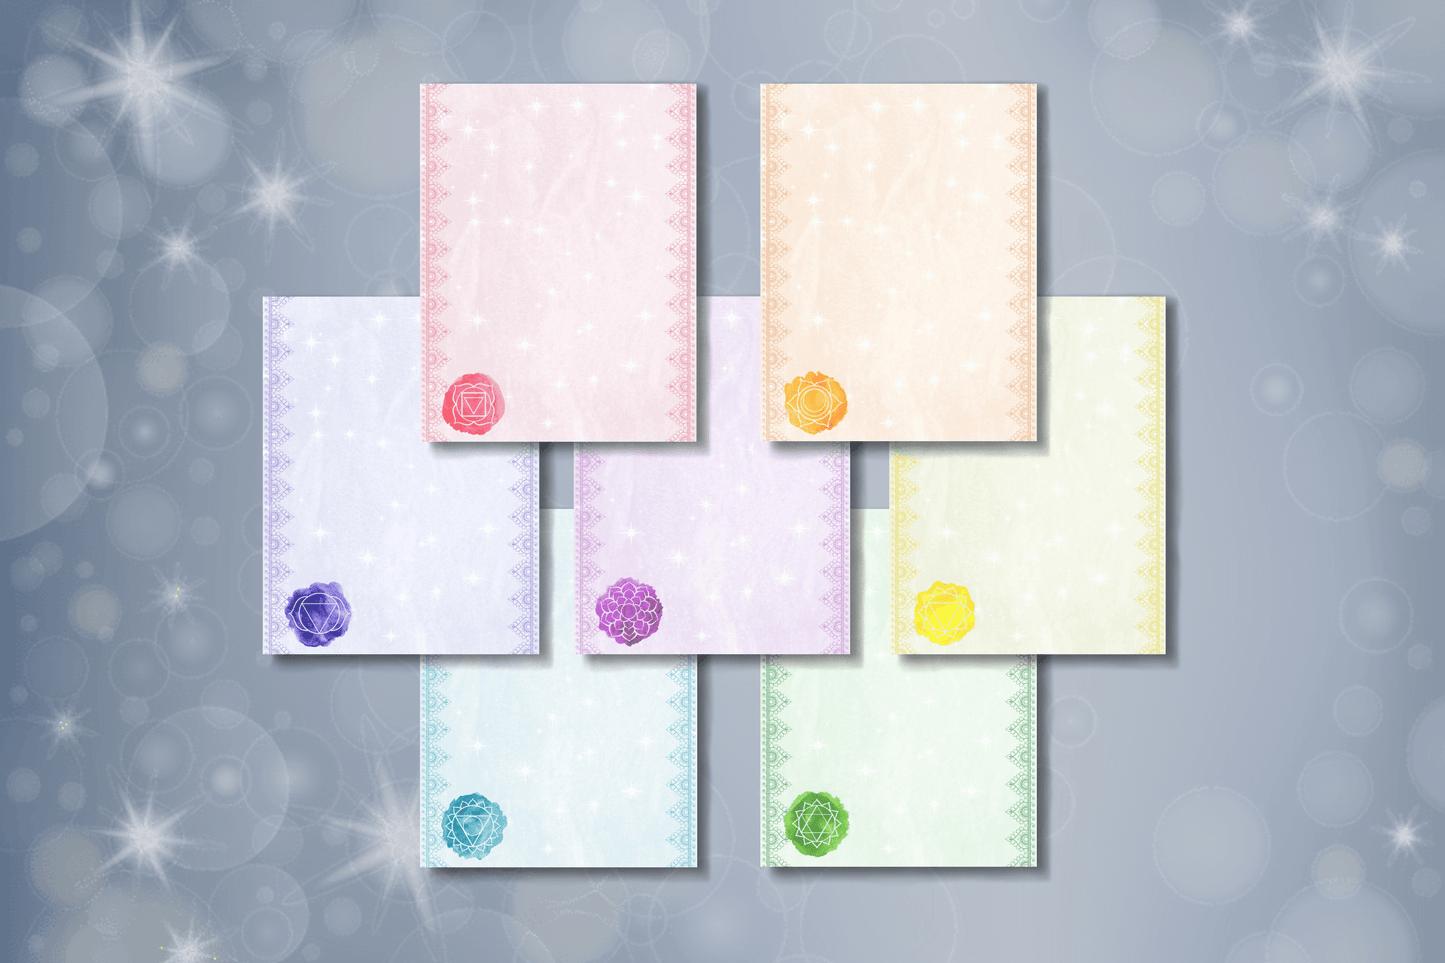 Chakras Stationary/Journal Pages/Craft Paper Printables